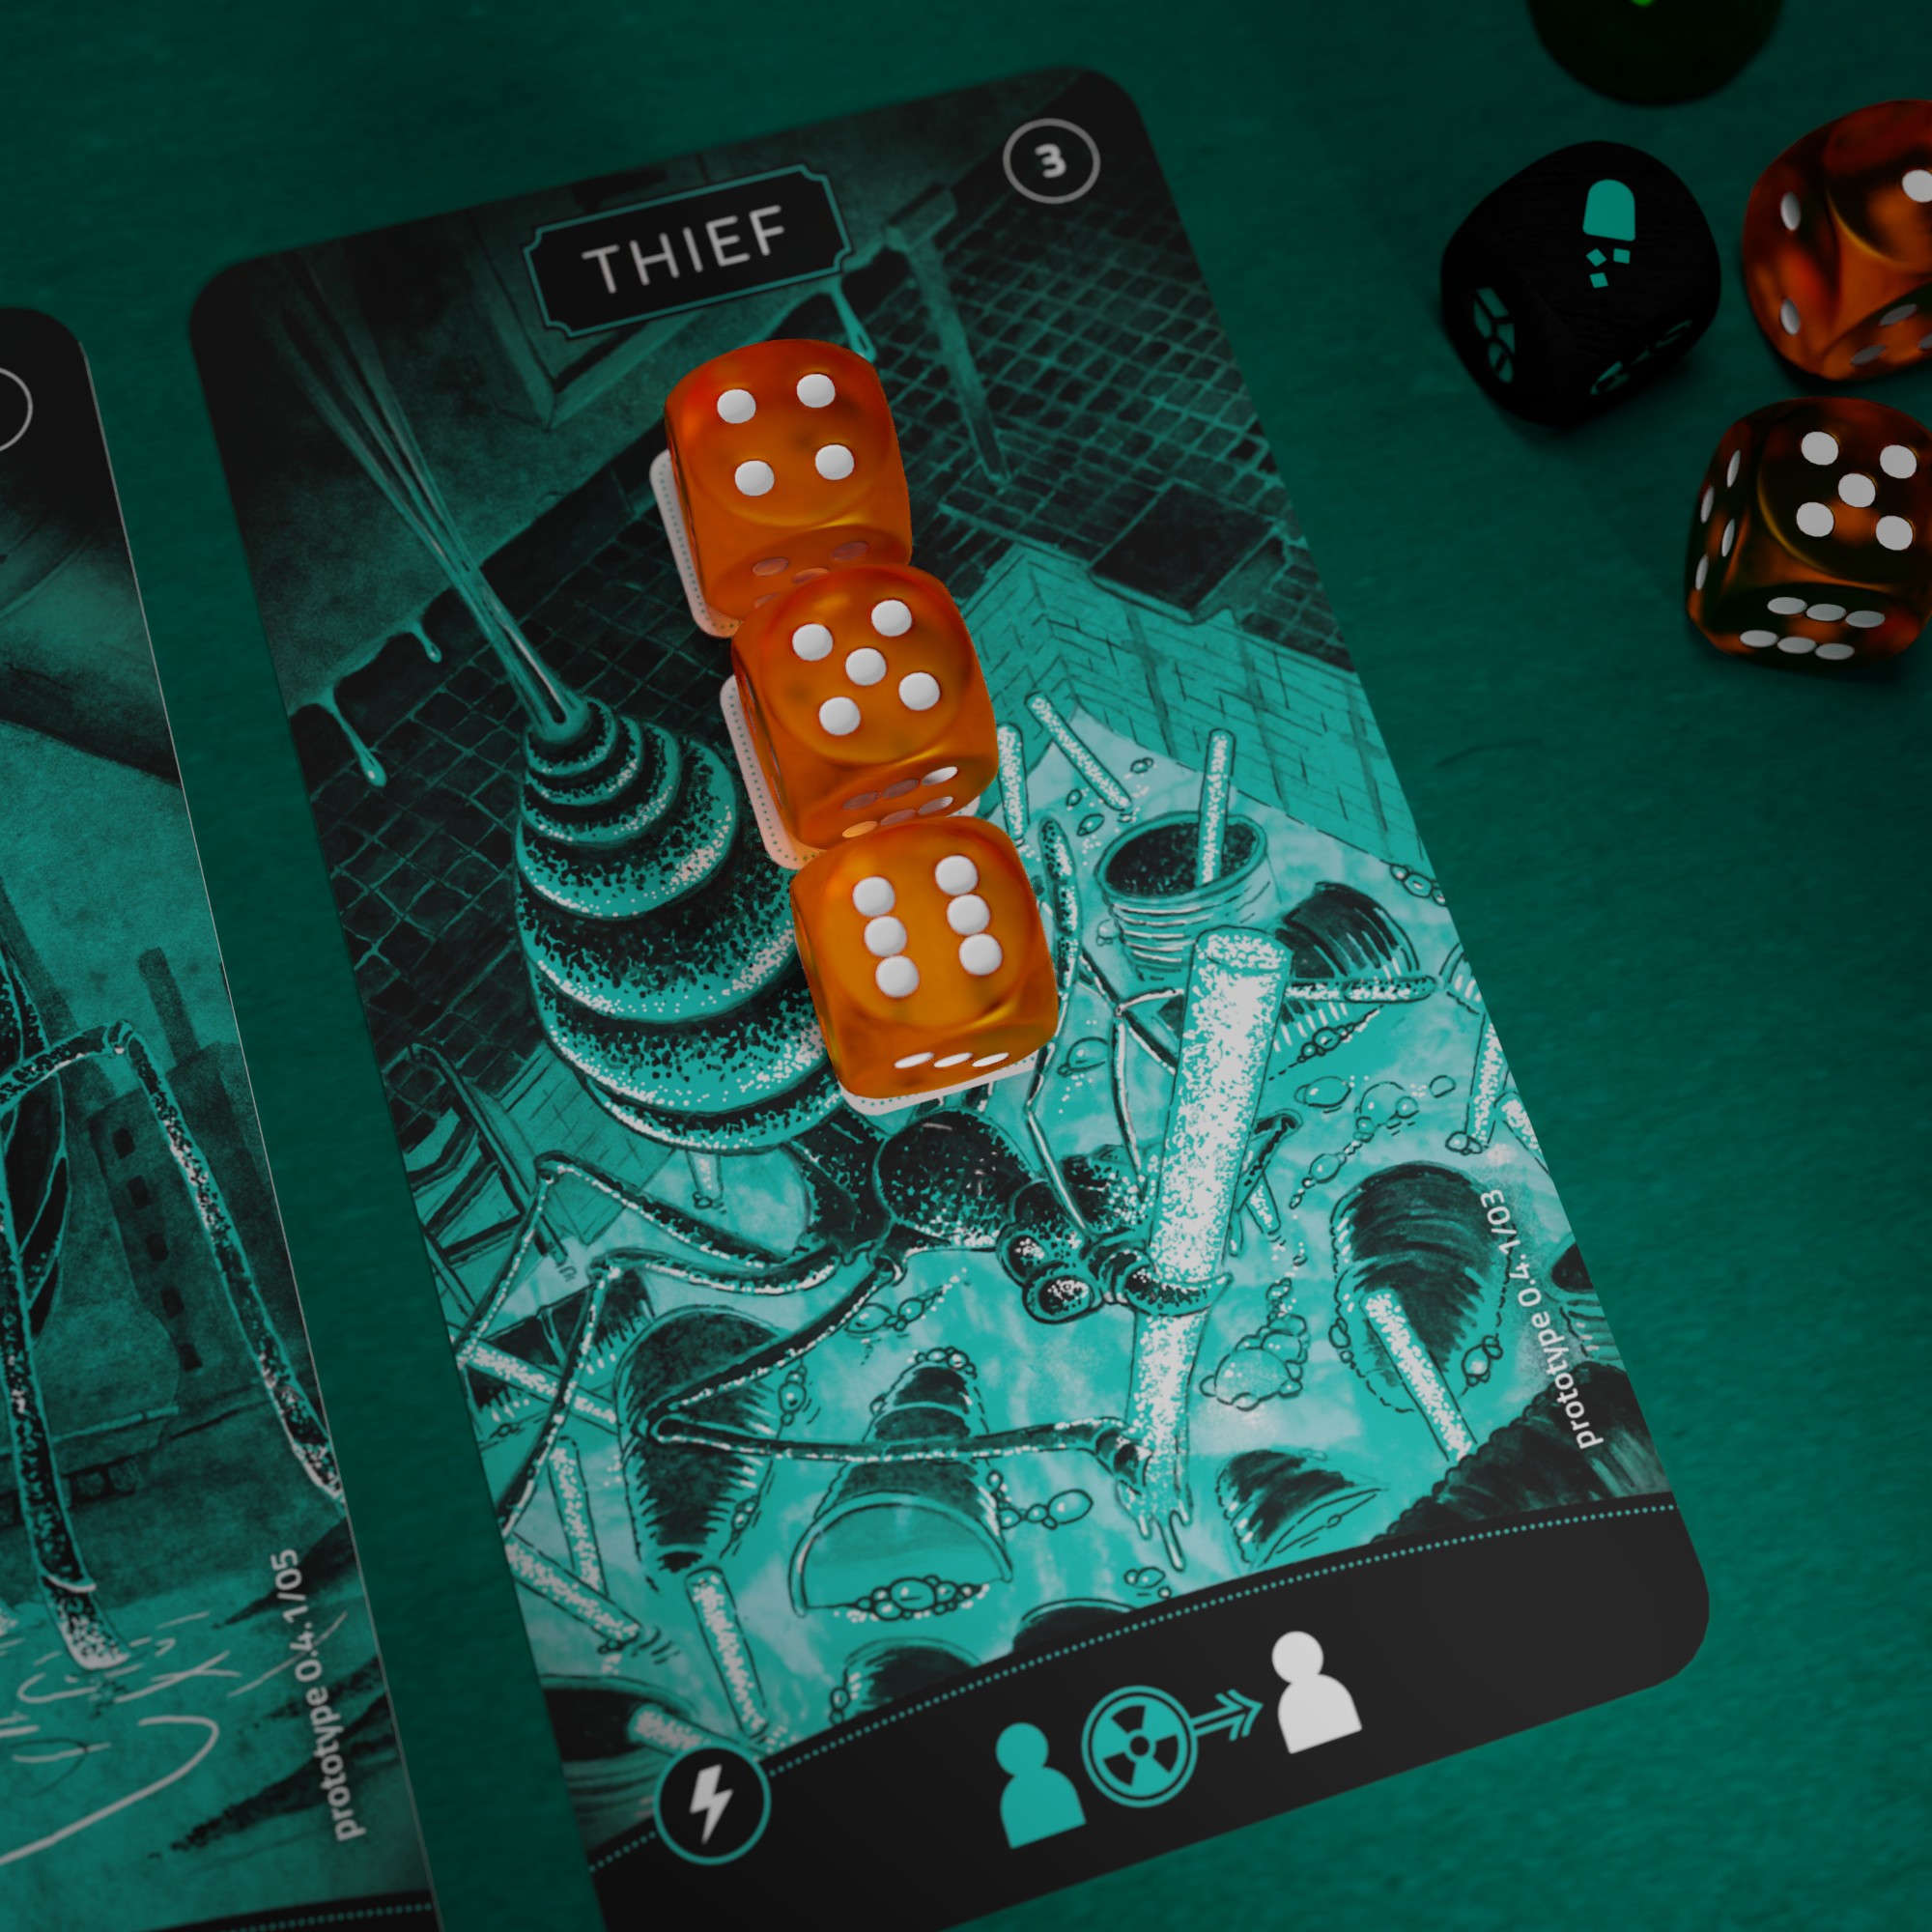 The NucleAnts Playing Card "Thief"